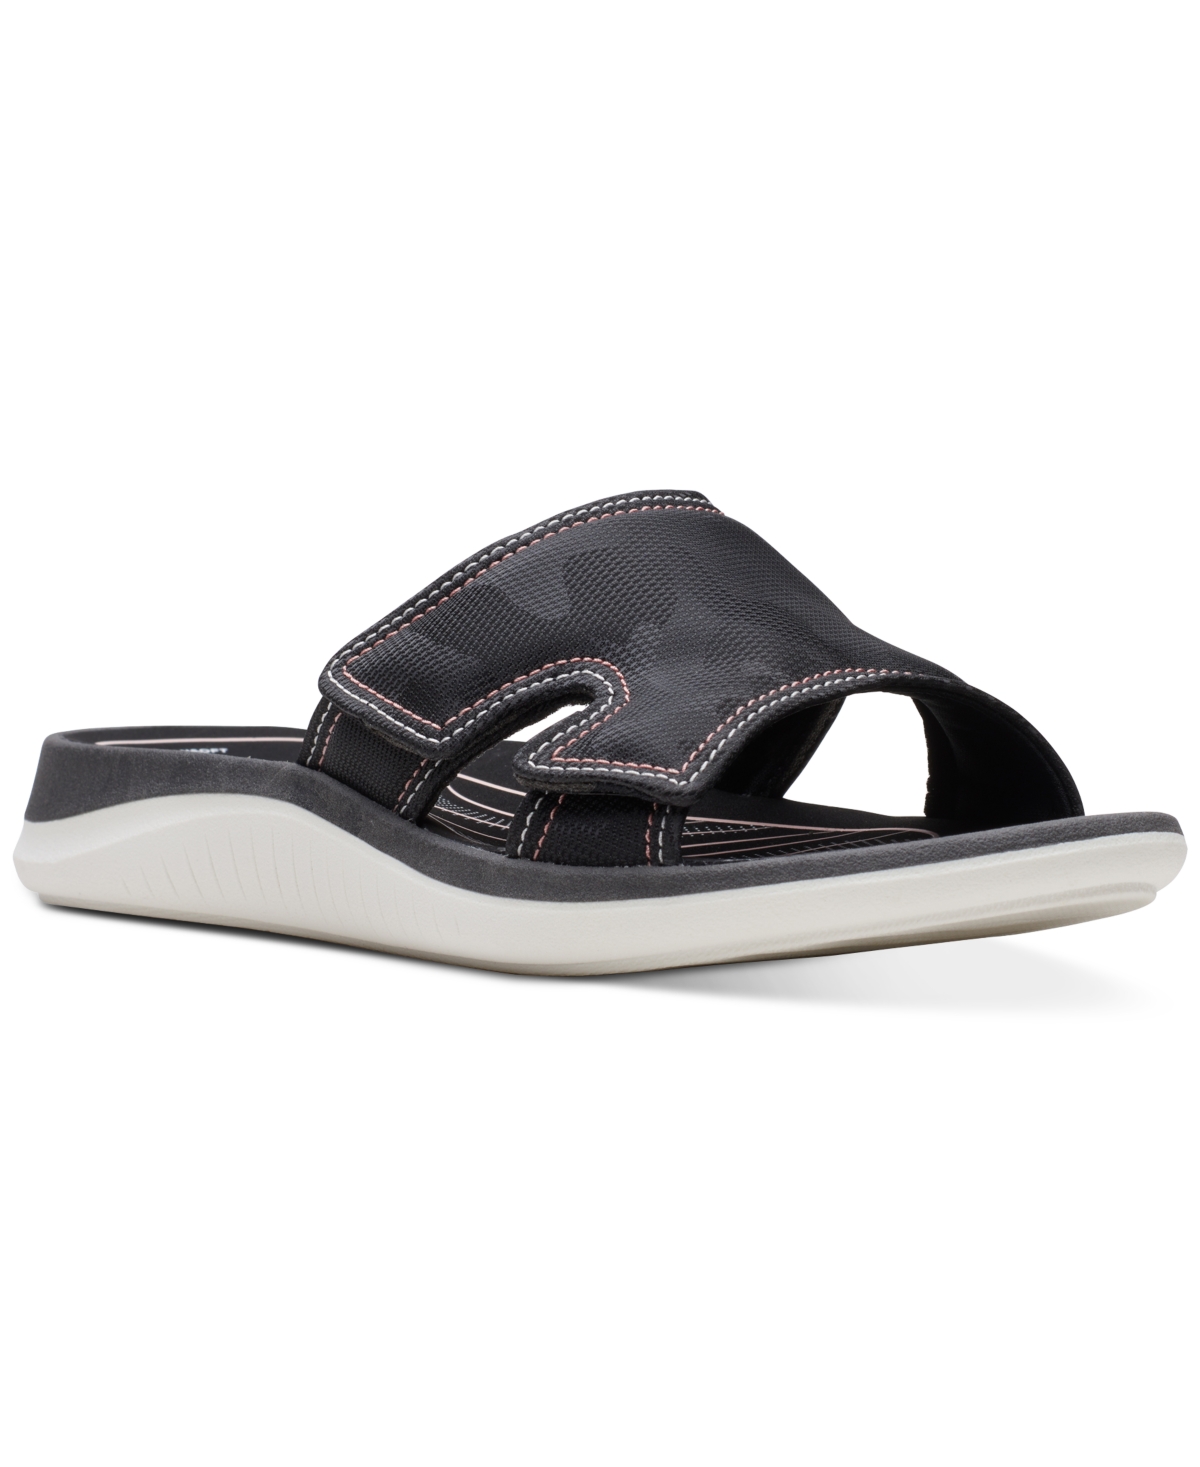 Clarks Women's Cloudsteppers Glide Bay Slip-On Sandals Women's Shoes